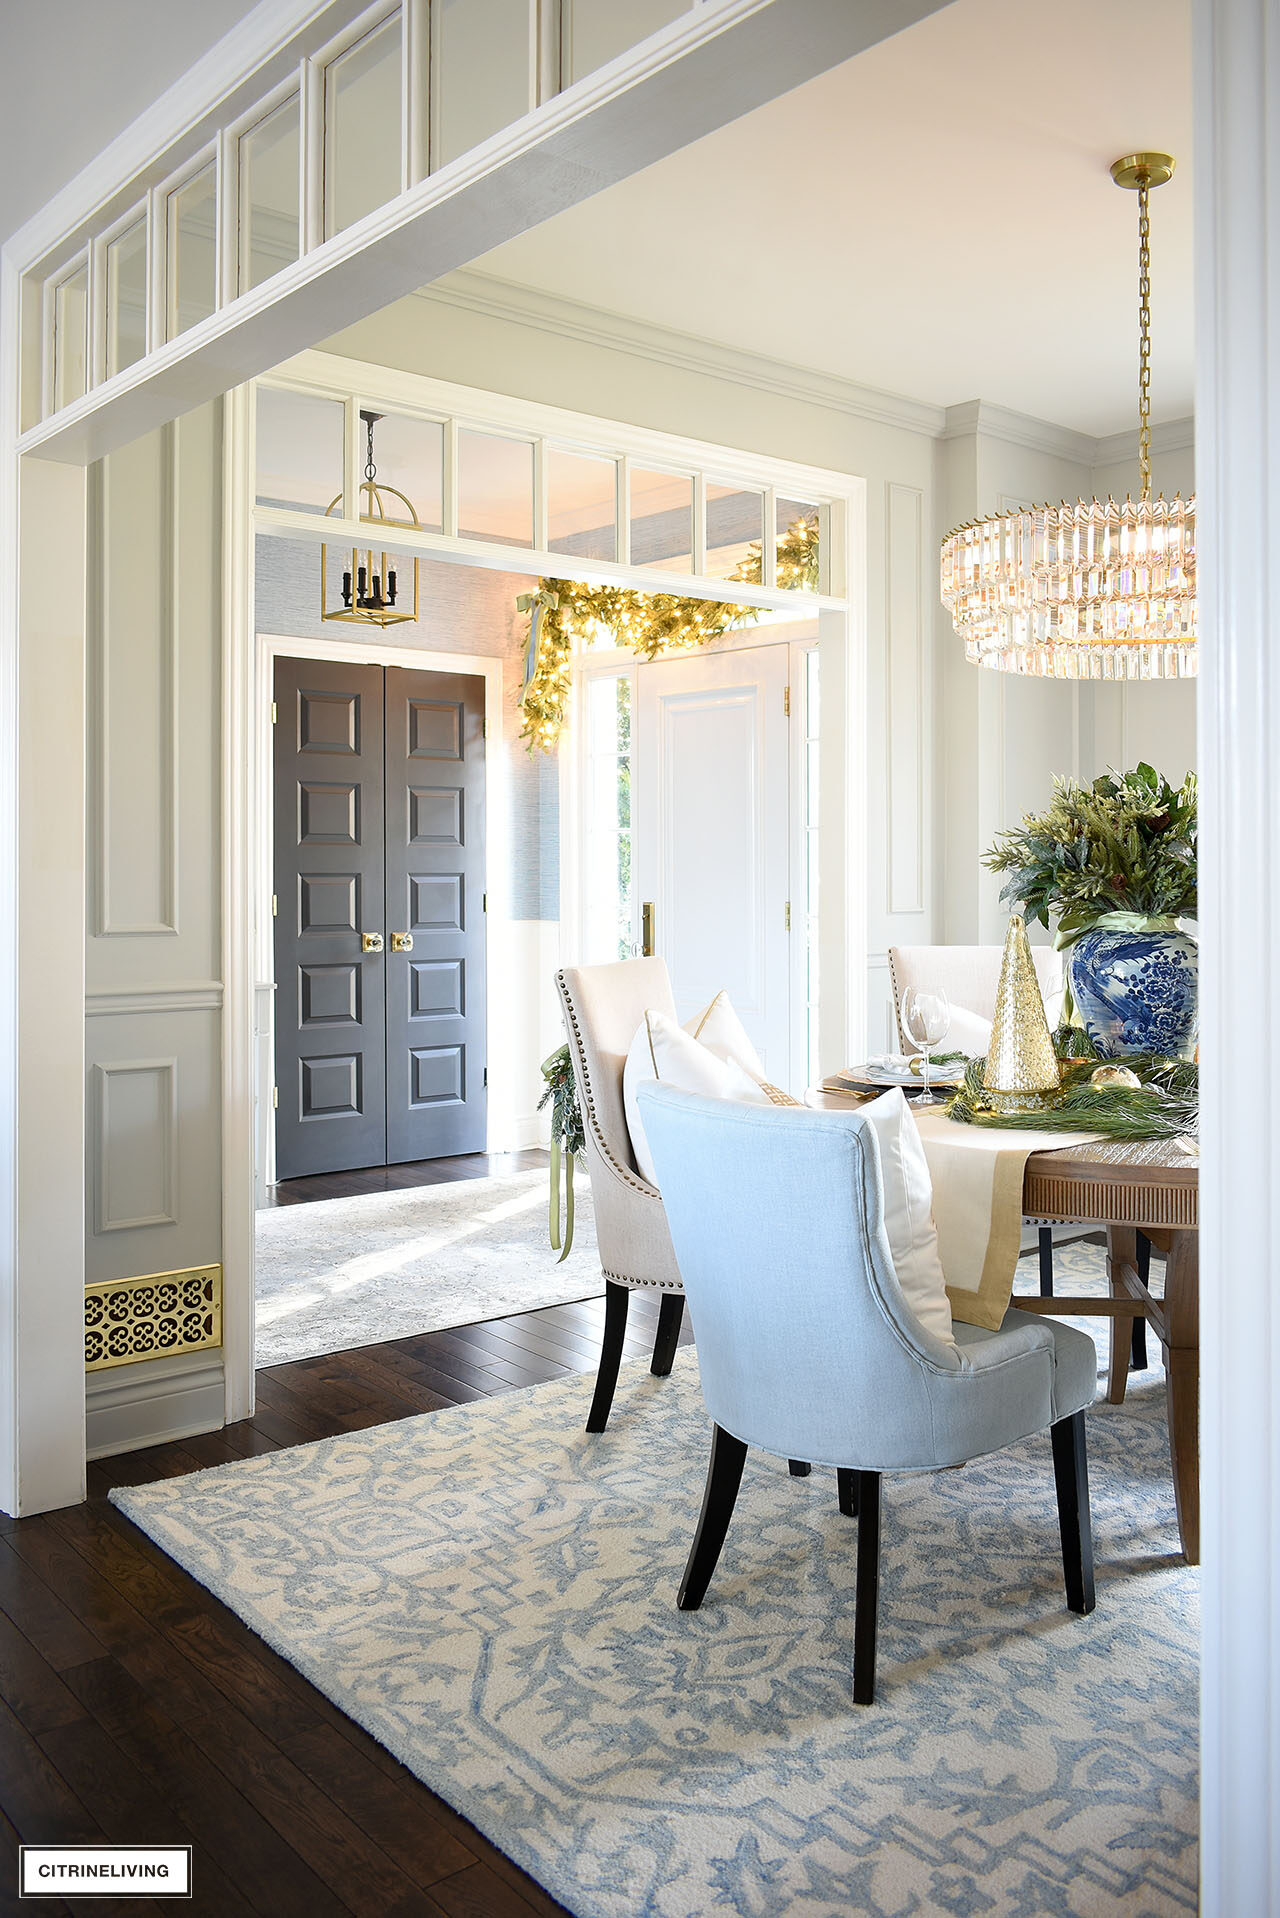 View of a dining room and entryway decorated for Christmas with elegant greenery accents and ribbon